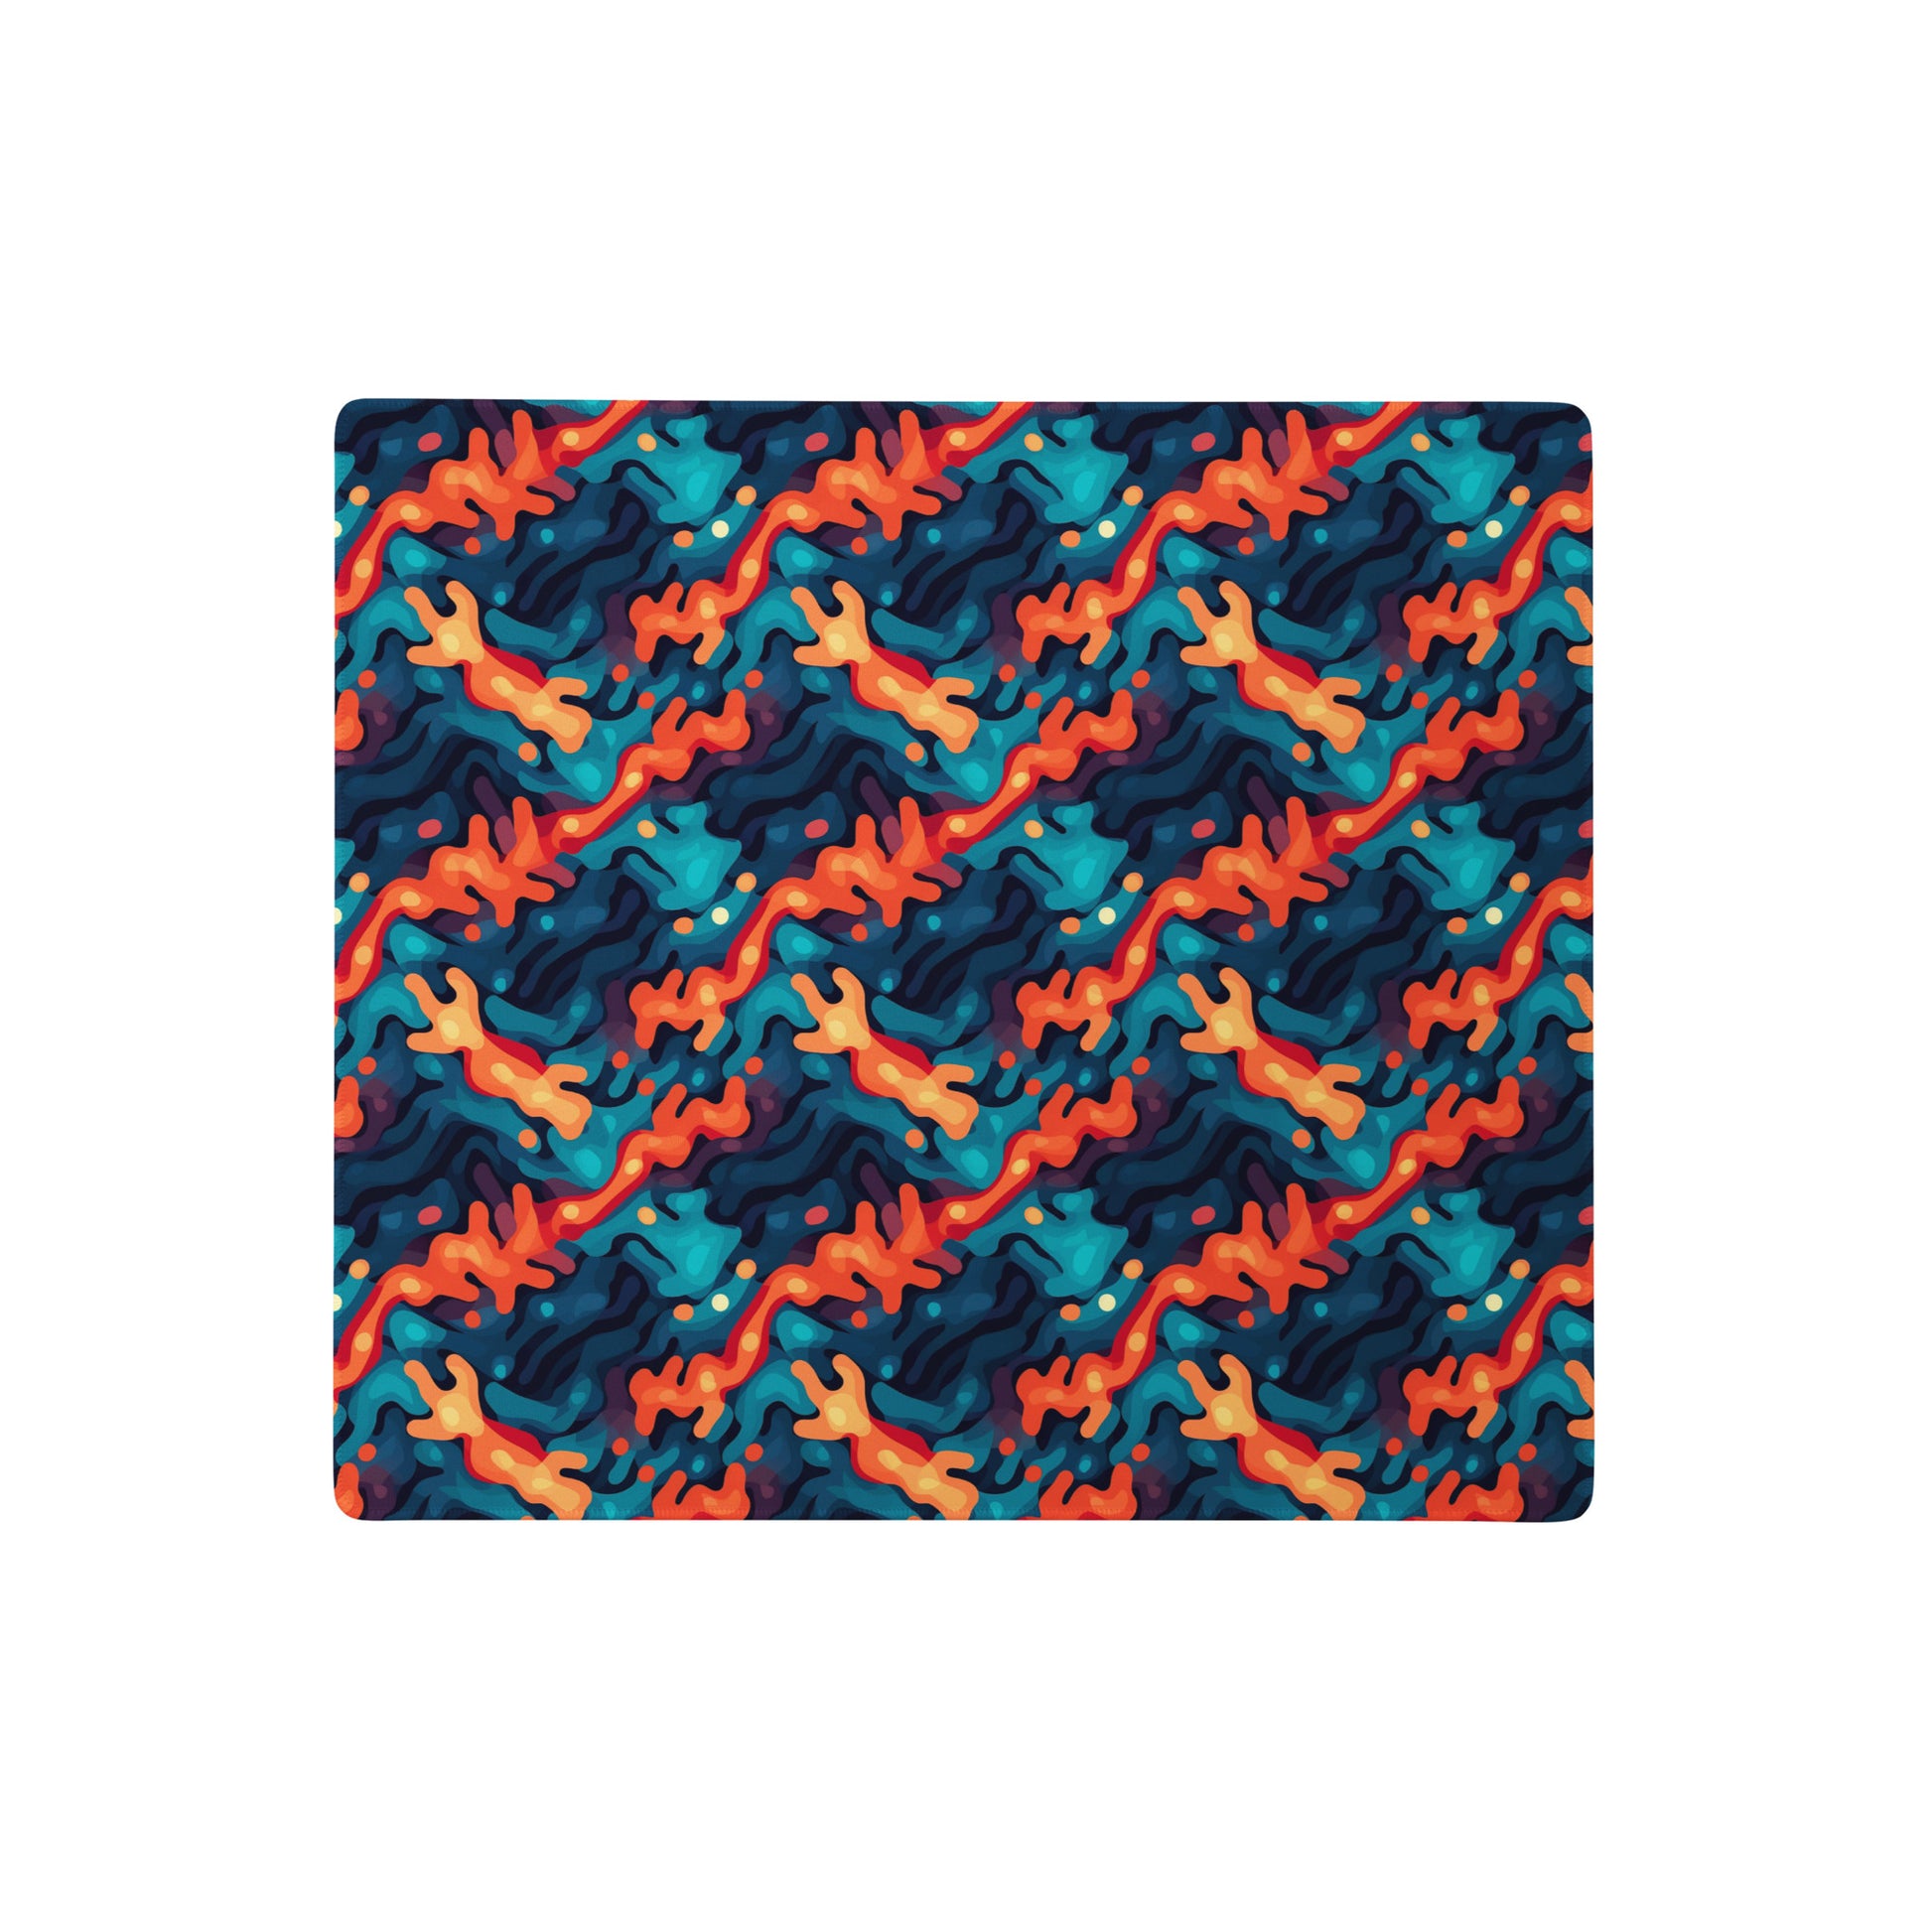 A 18" x 16" desk pad with a wavy woven pattern on it. Red and Blue in color.